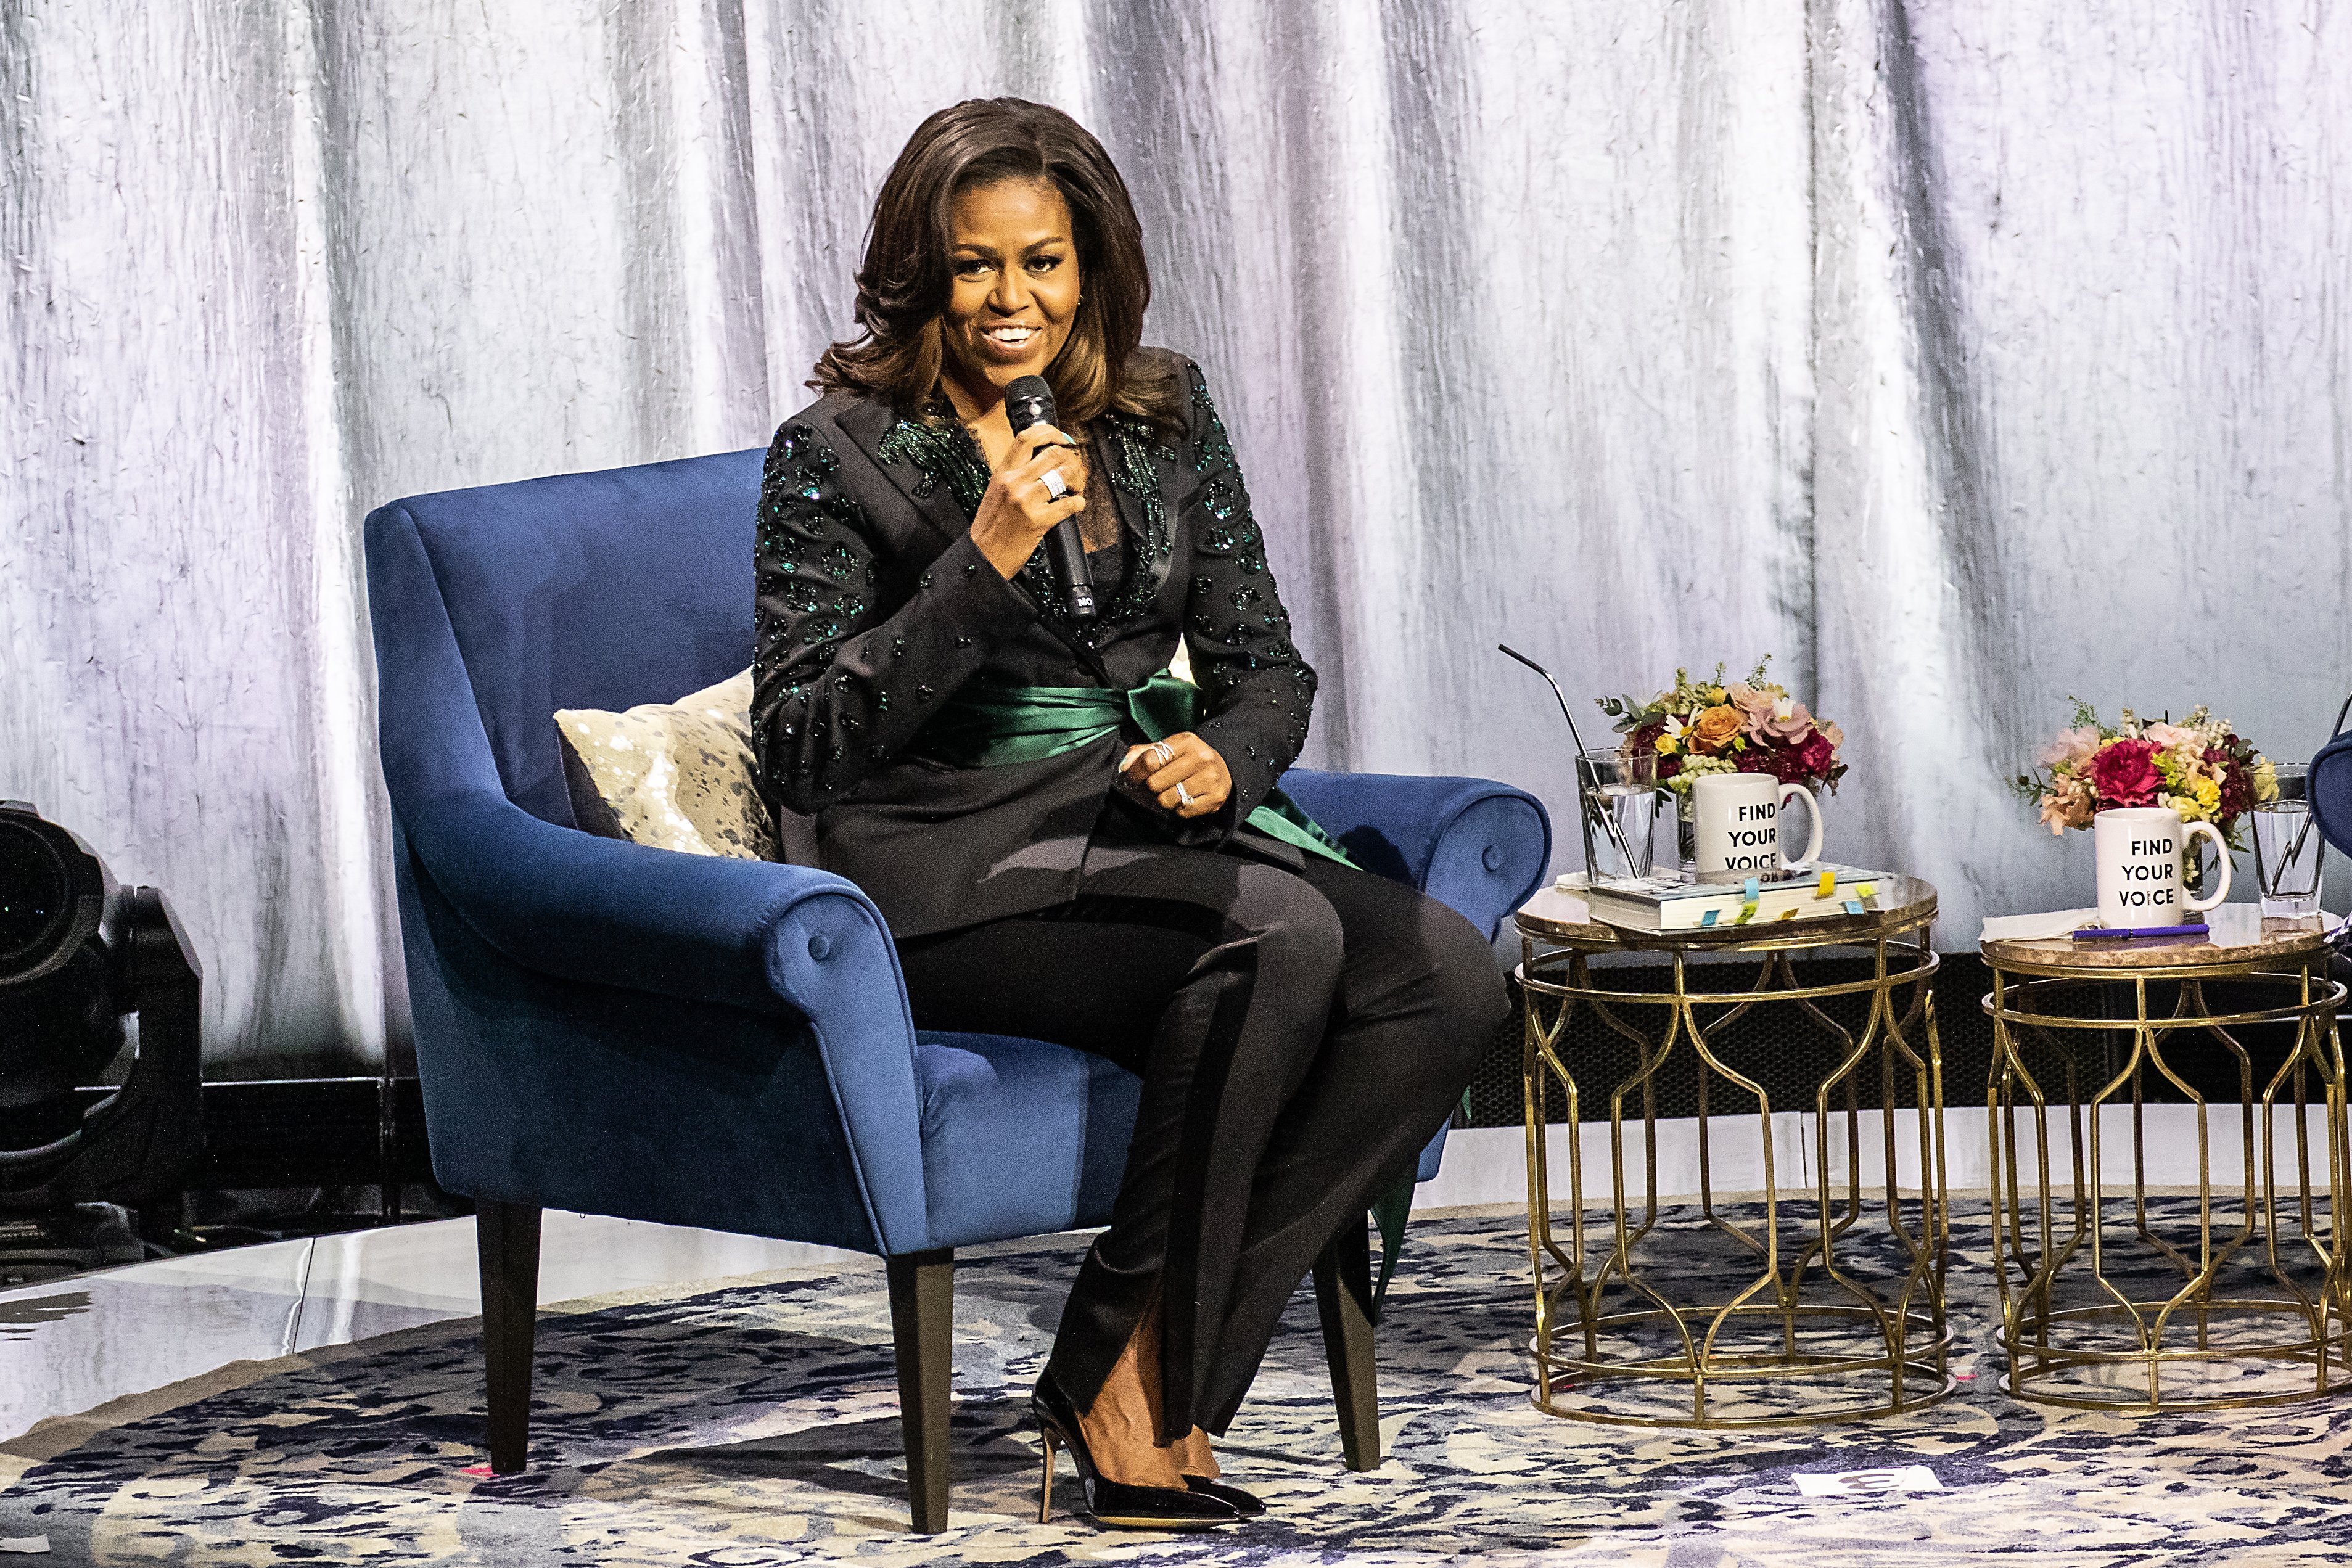 Michelle Obama at the Oslo, Norway leg of her "Becoming" book tour in April 2019. | Photo: Getty Images